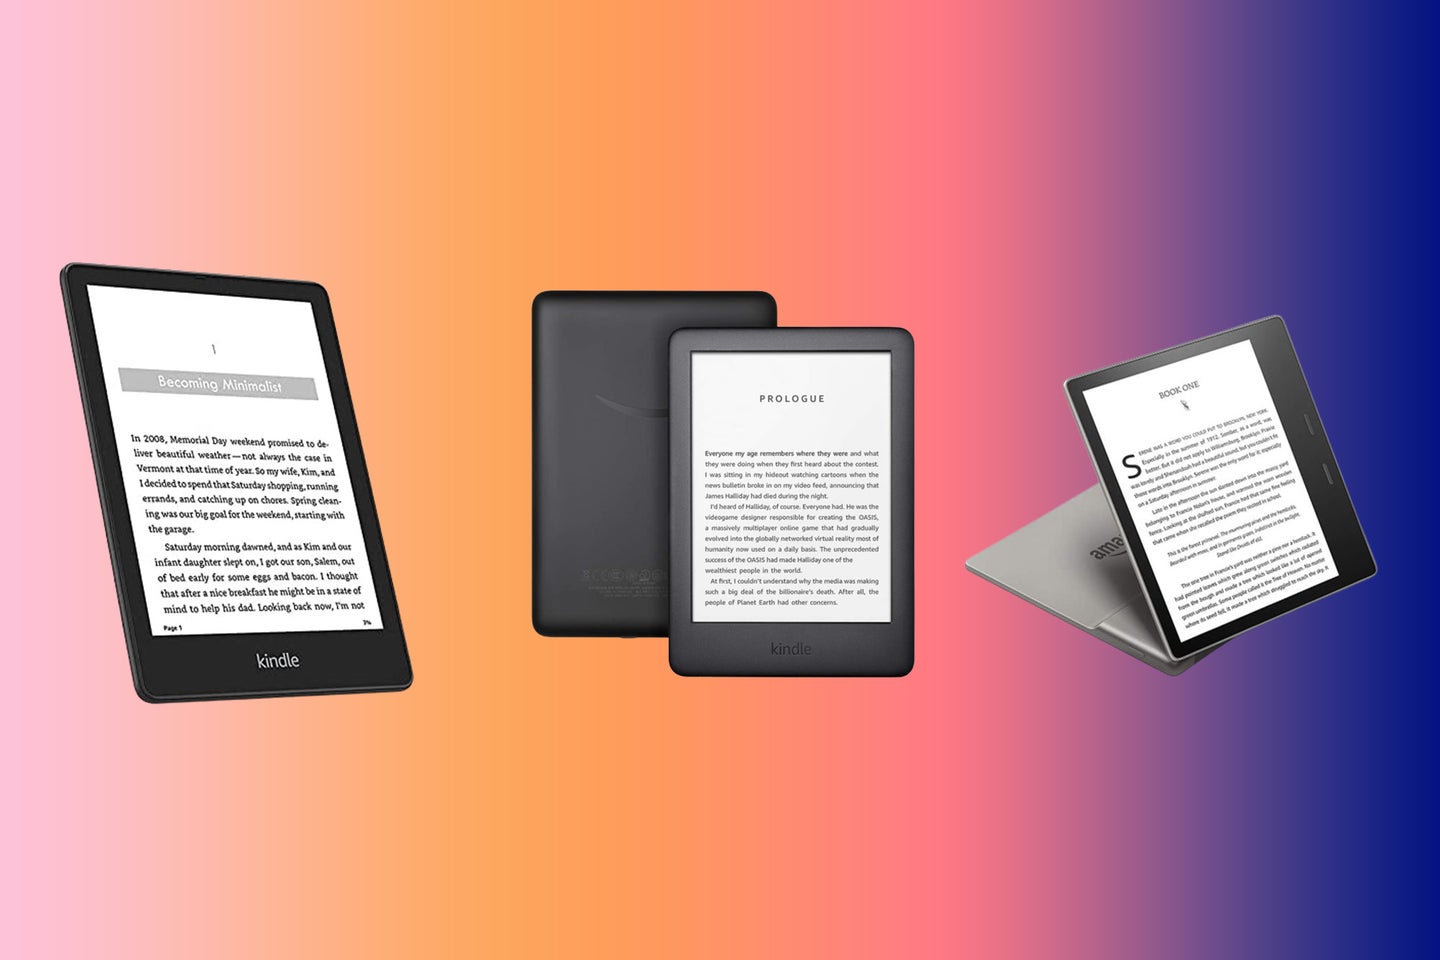 an Amazon Kindle Paperwhite, an Amazon Kindle, and a Amazon Kindle Oasis on a pink, orange, and blue gradient background.